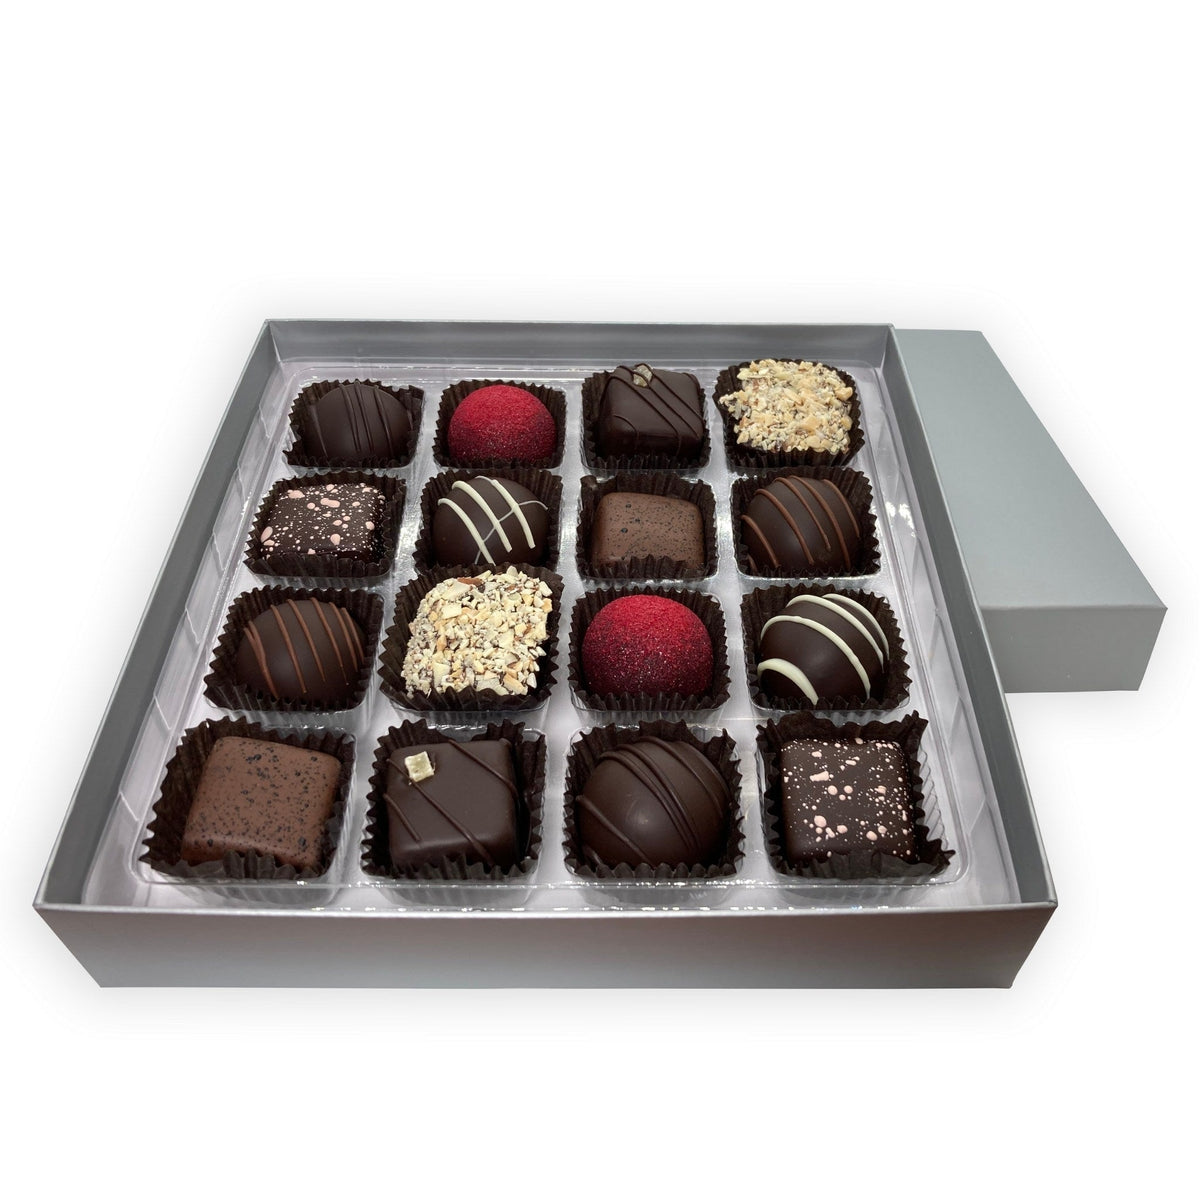 Dilettante Chocolates Dark Chocolate Collection Gift Box Featuring Truffles, Toffee, and Caramels Covered in High-Quality Dark Chocolate